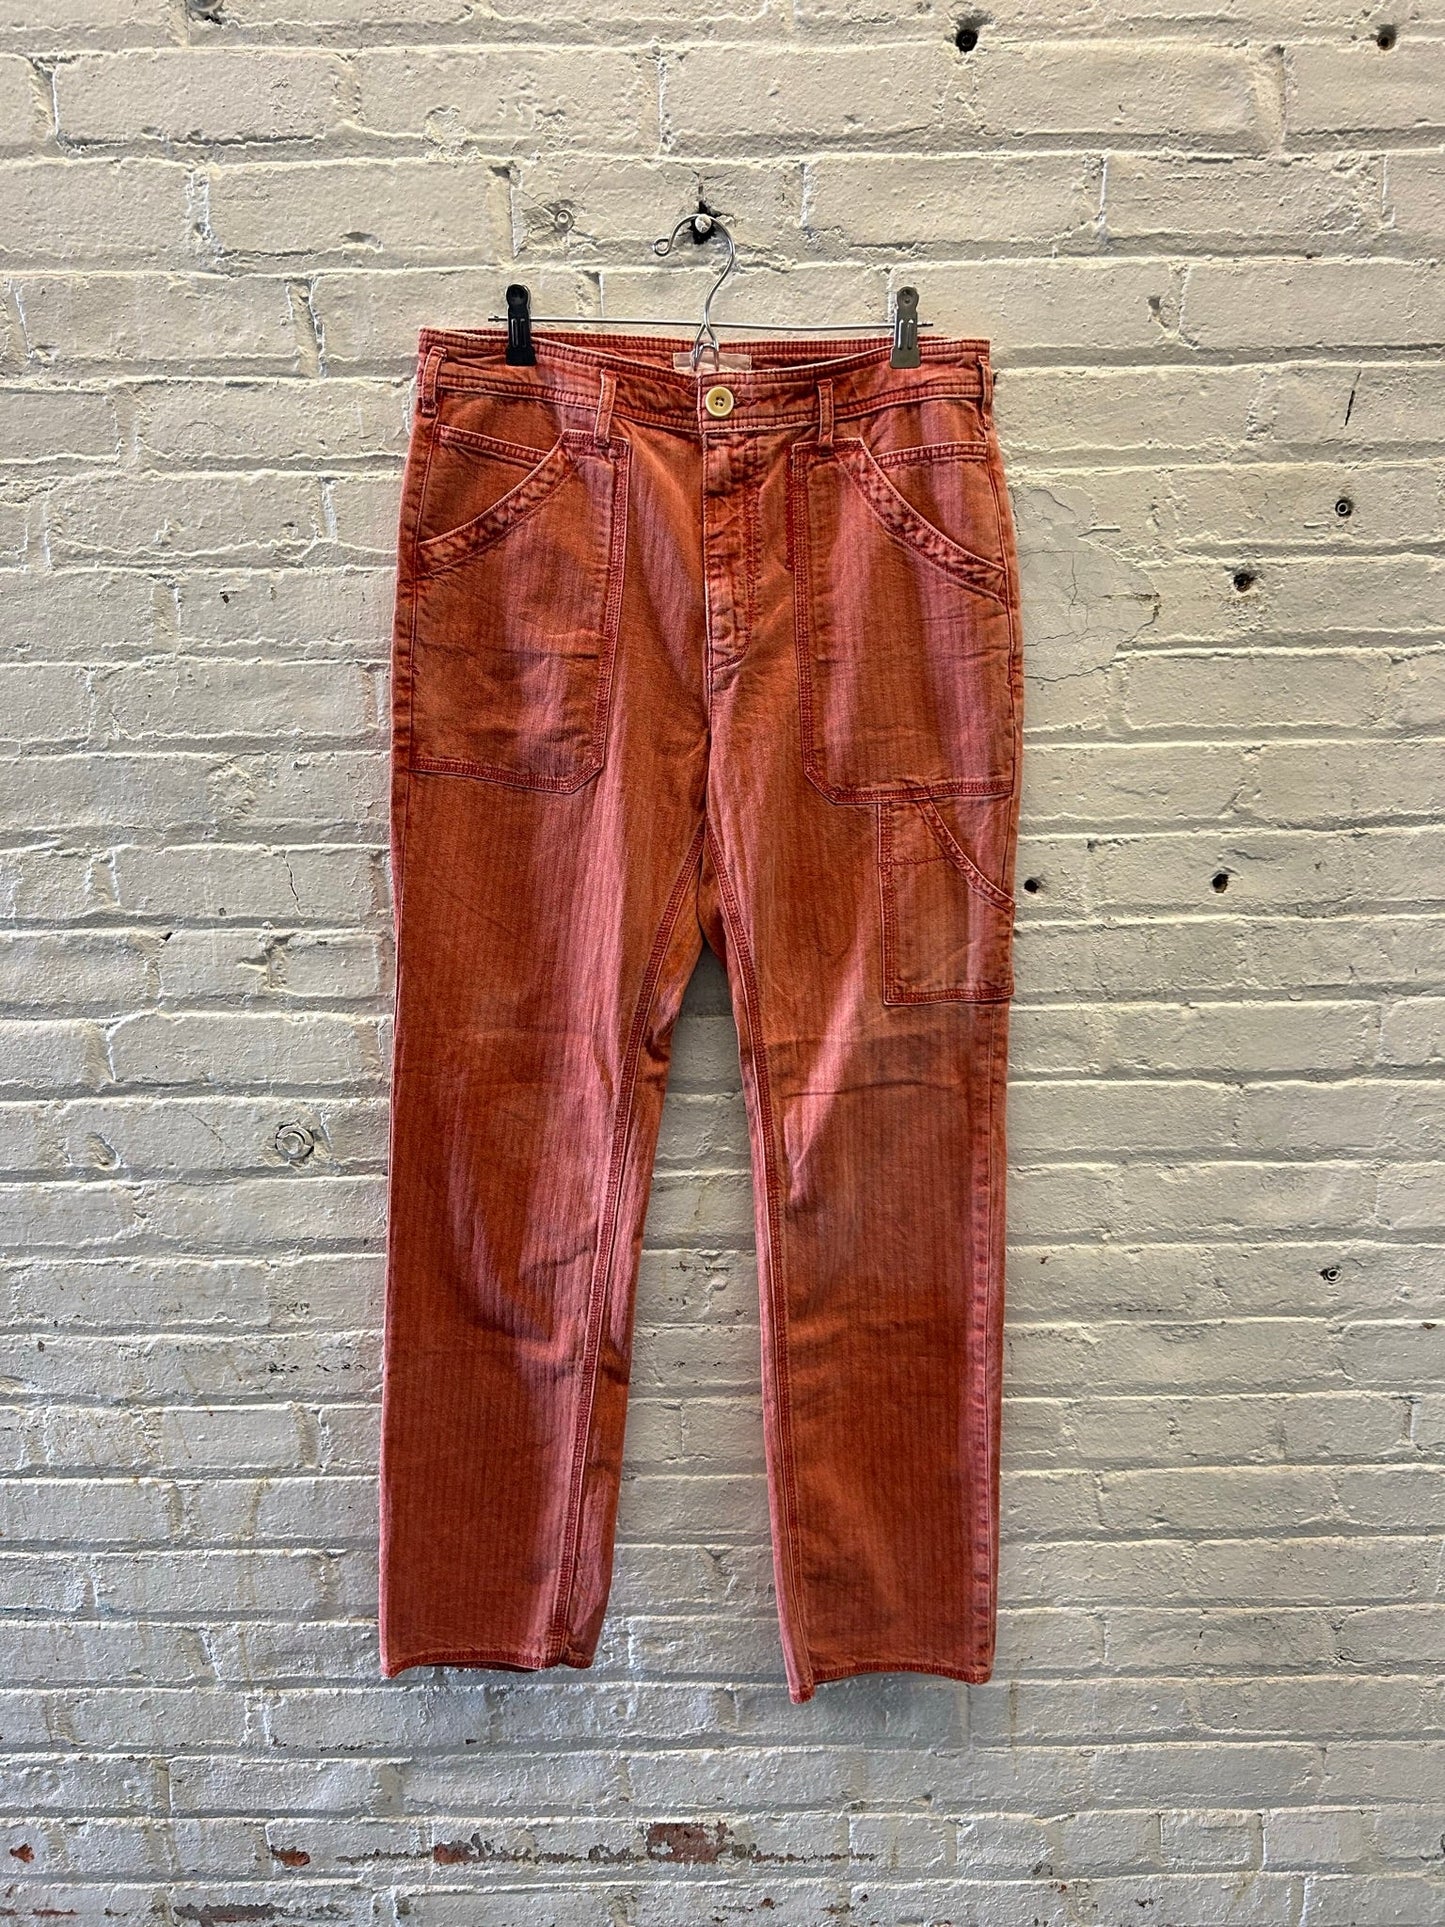 Anthropologie Red Work Pants